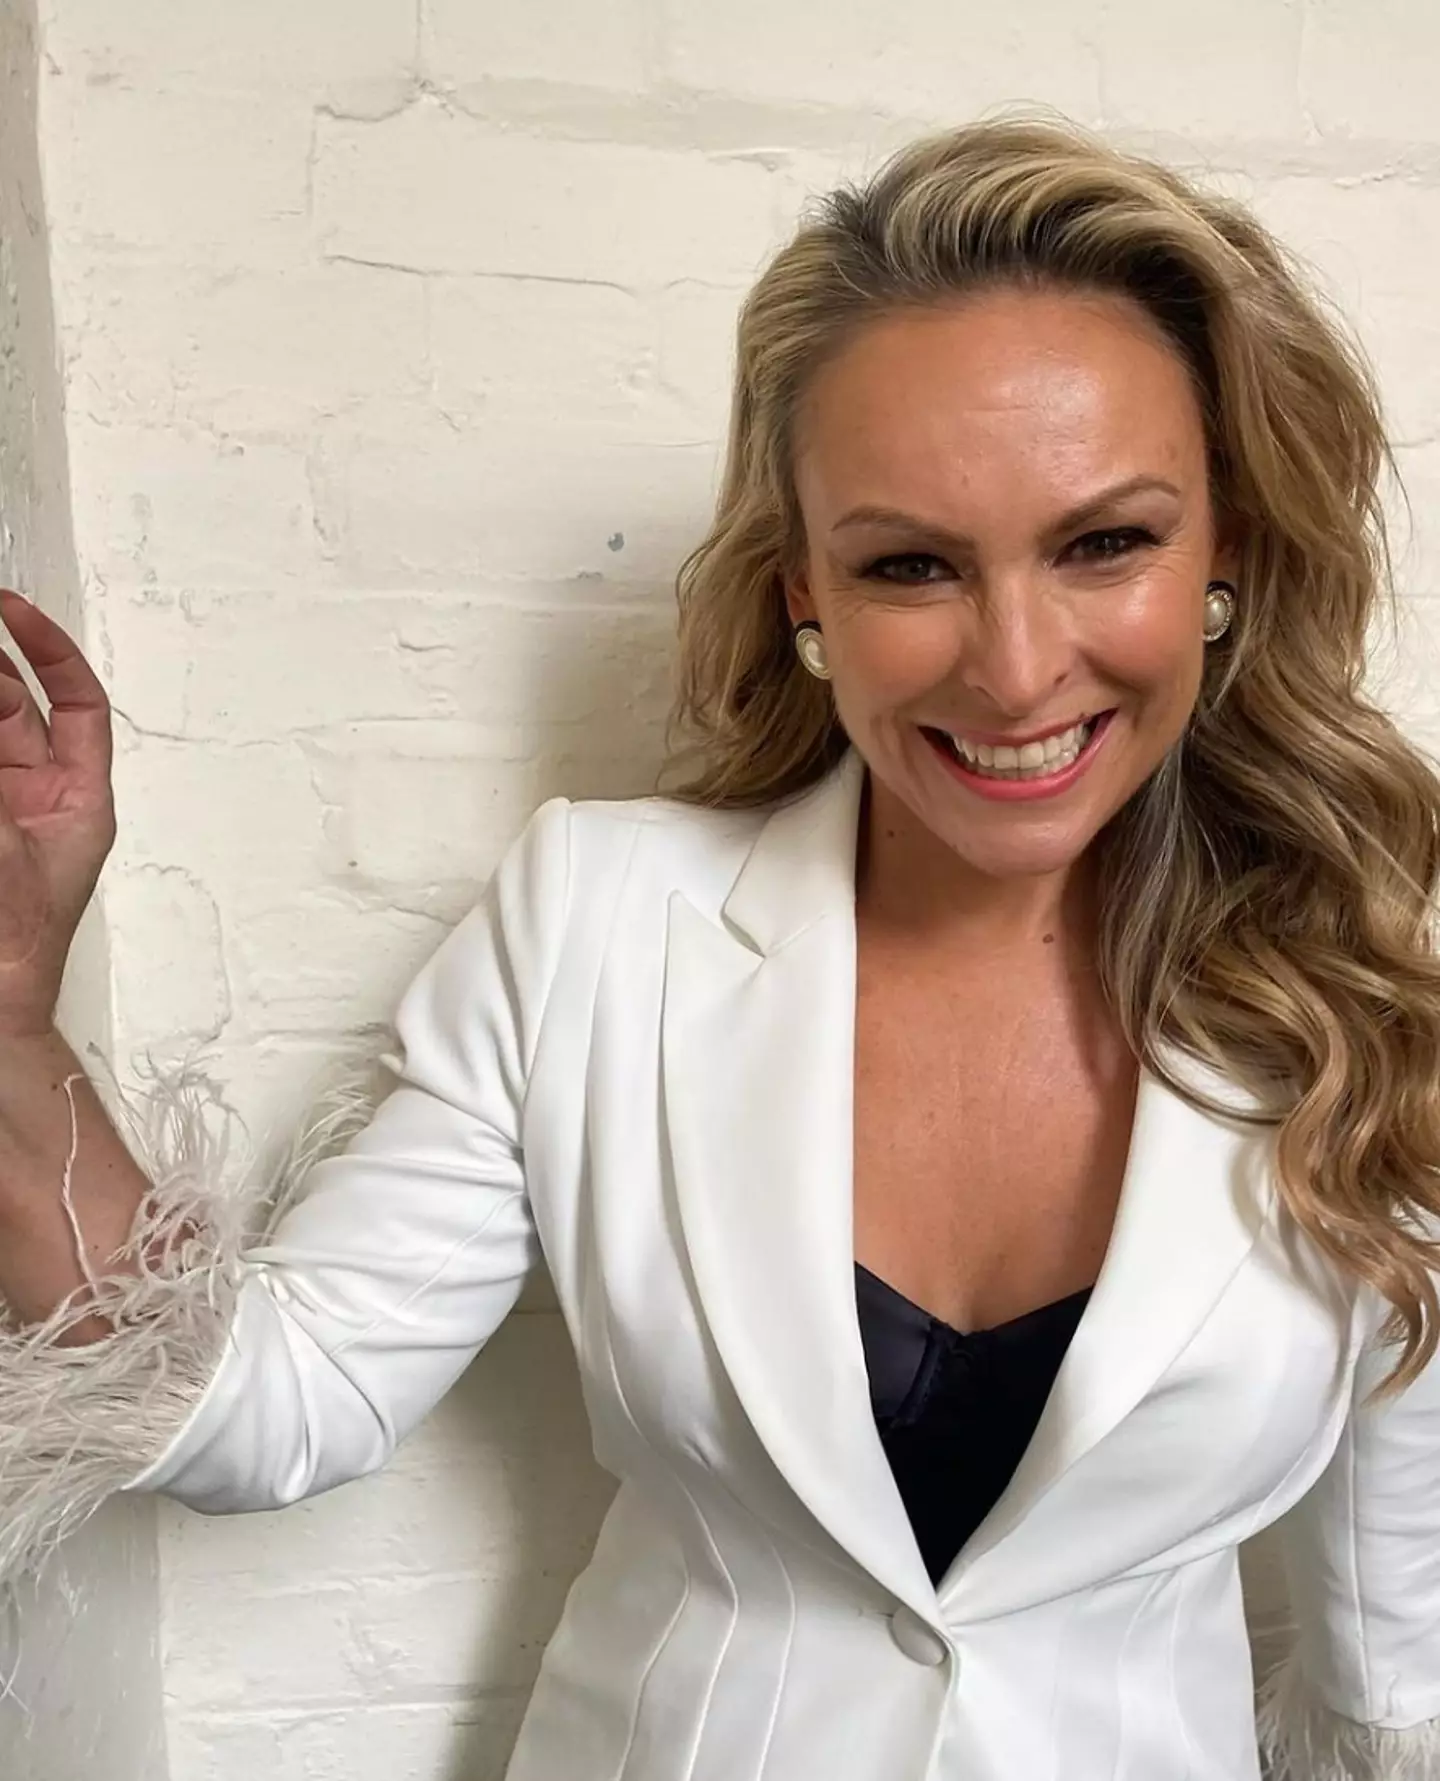 The MAFS dating coach revealed she has been diagnosed with colon cancer.